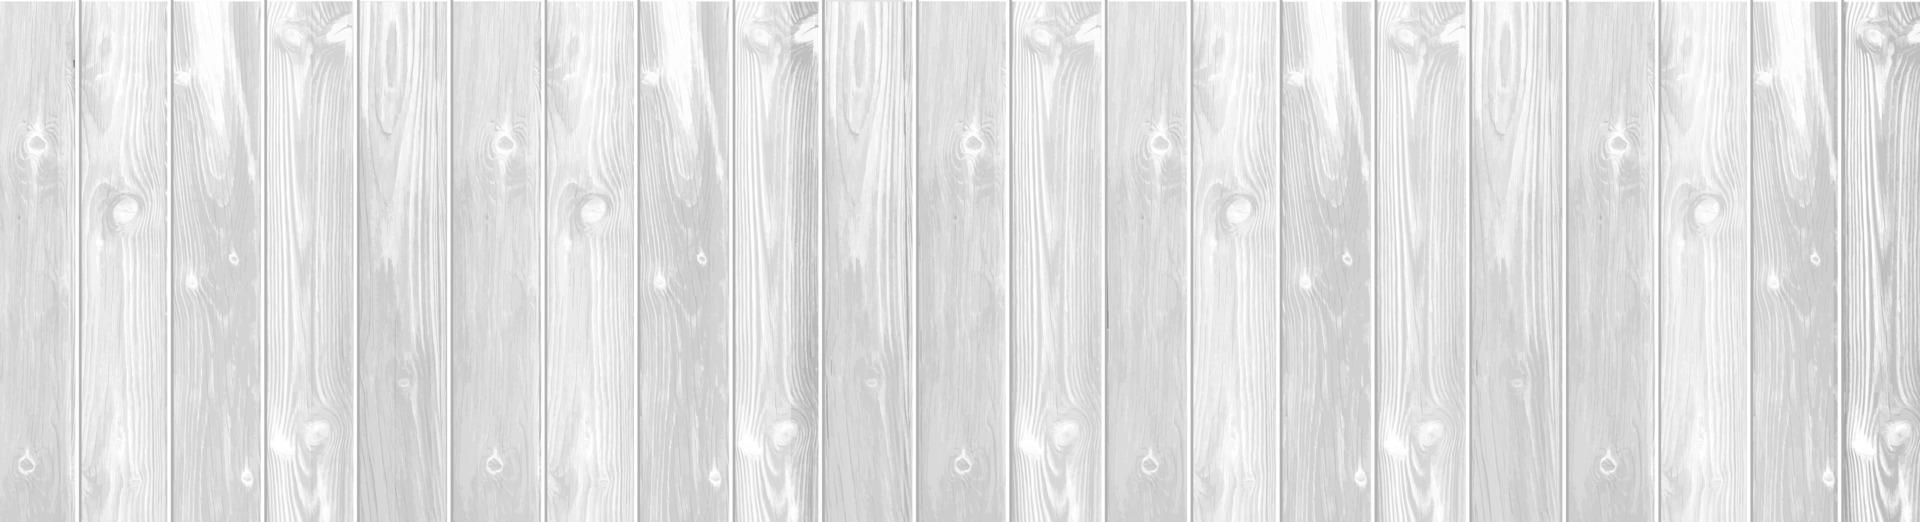 White wooden board background vector